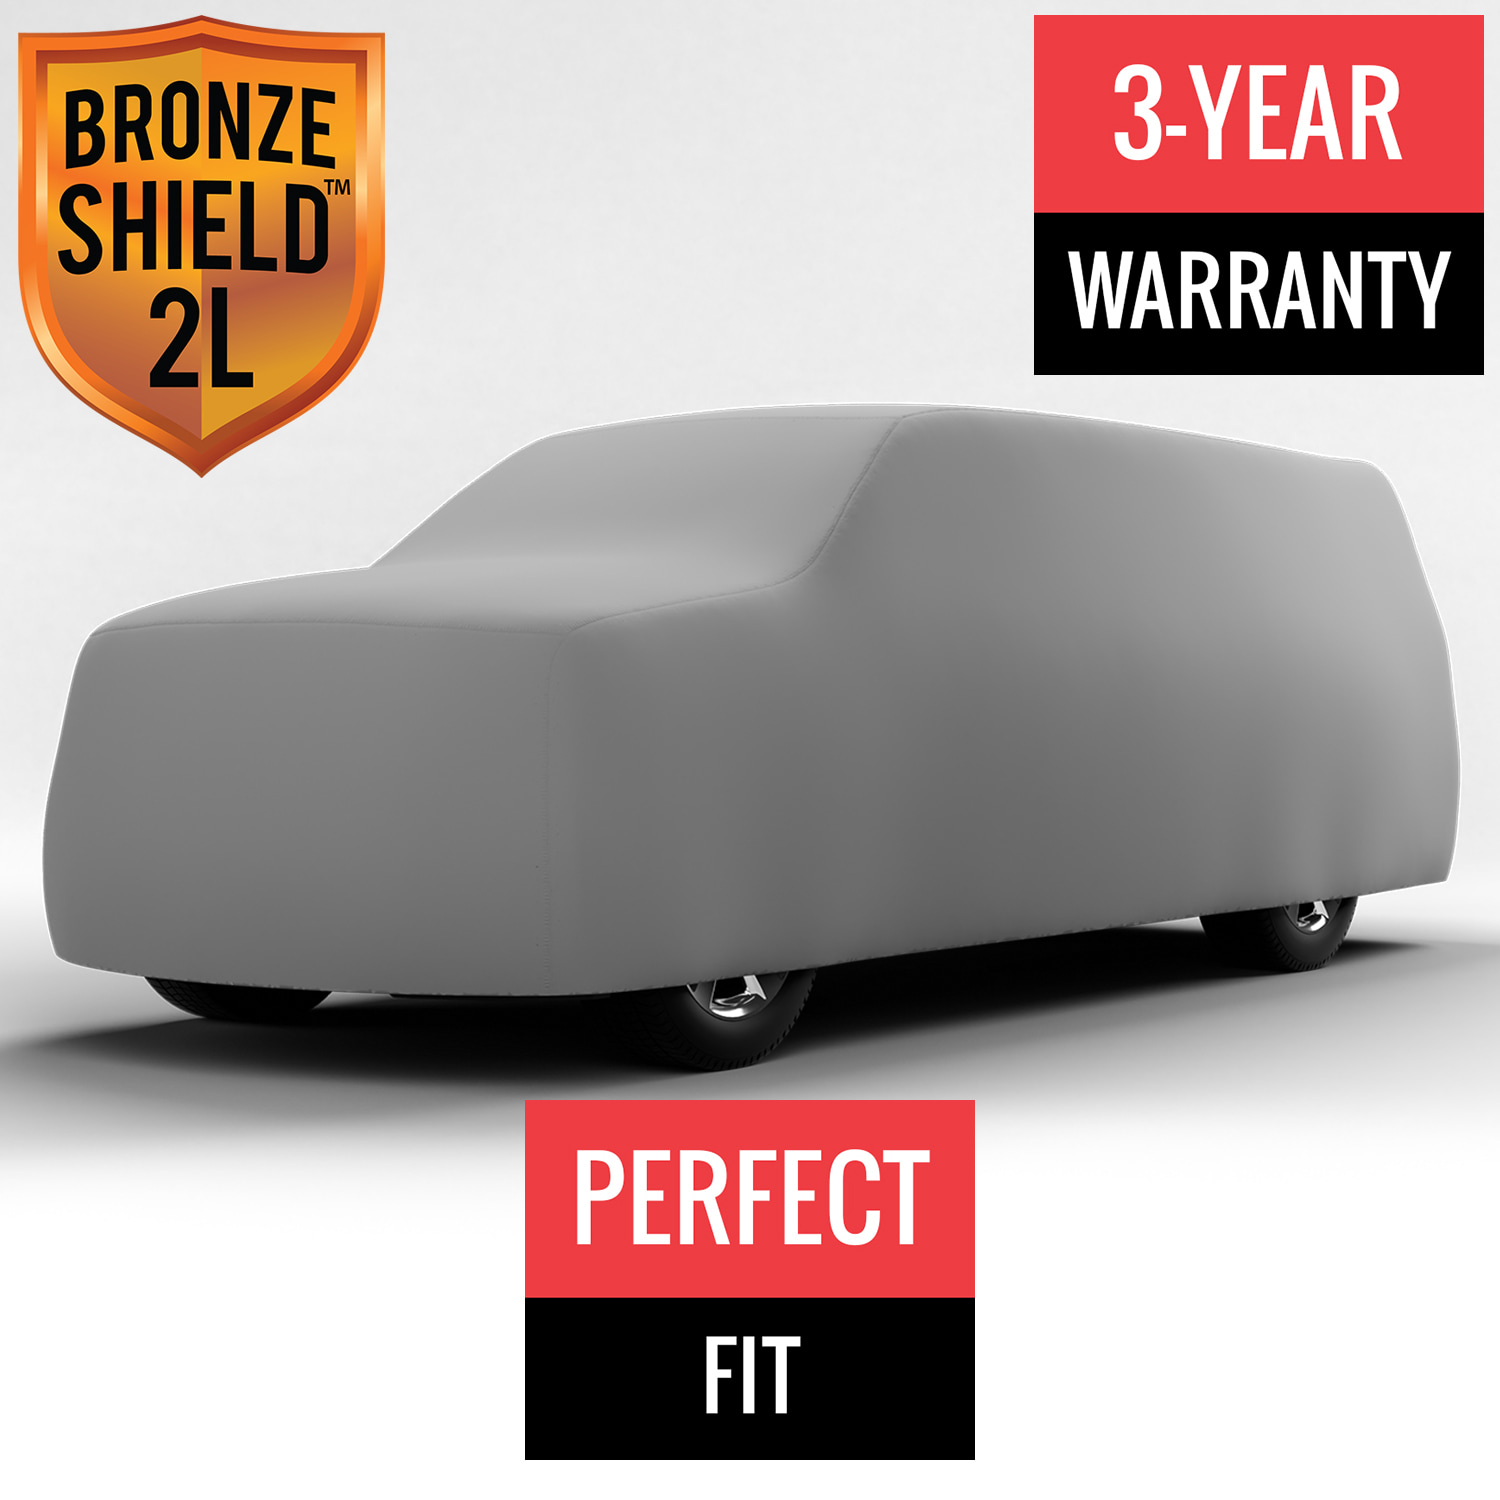 Bronze Shield 2L - Car Cover for Chevrolet K10 Pickup 1961 Regular Cab Pickup Long Bed with Camper Shell